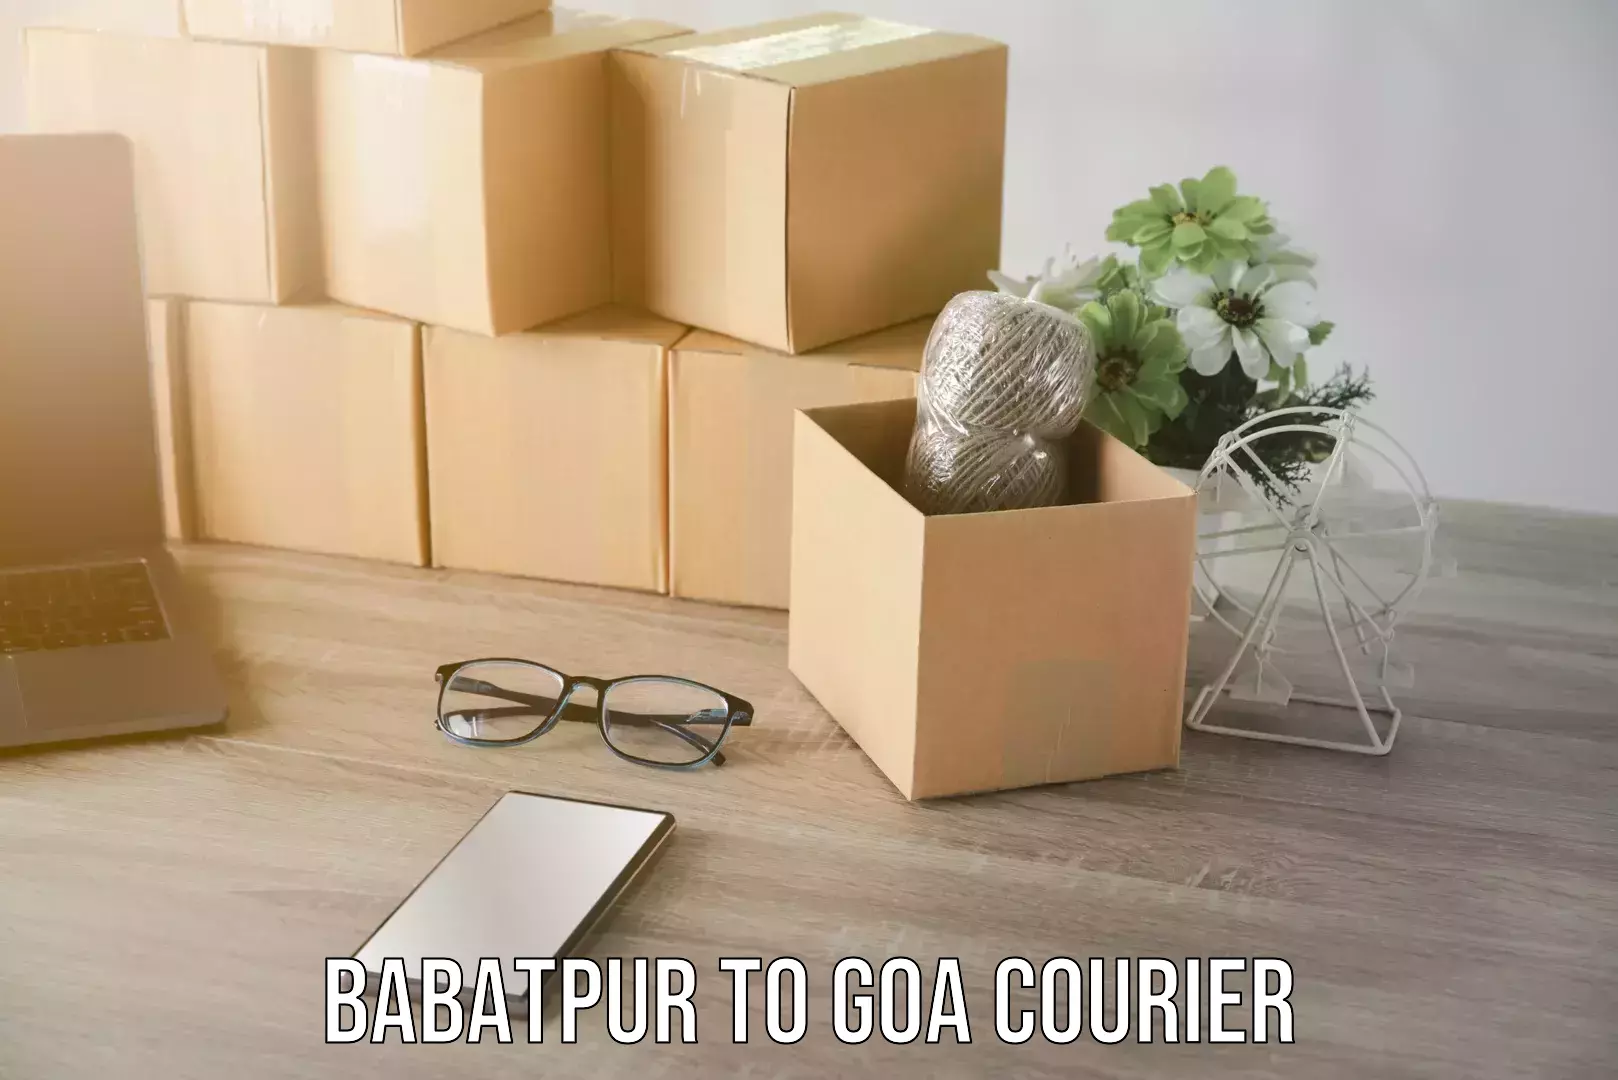 24/7 courier service Babatpur to Goa